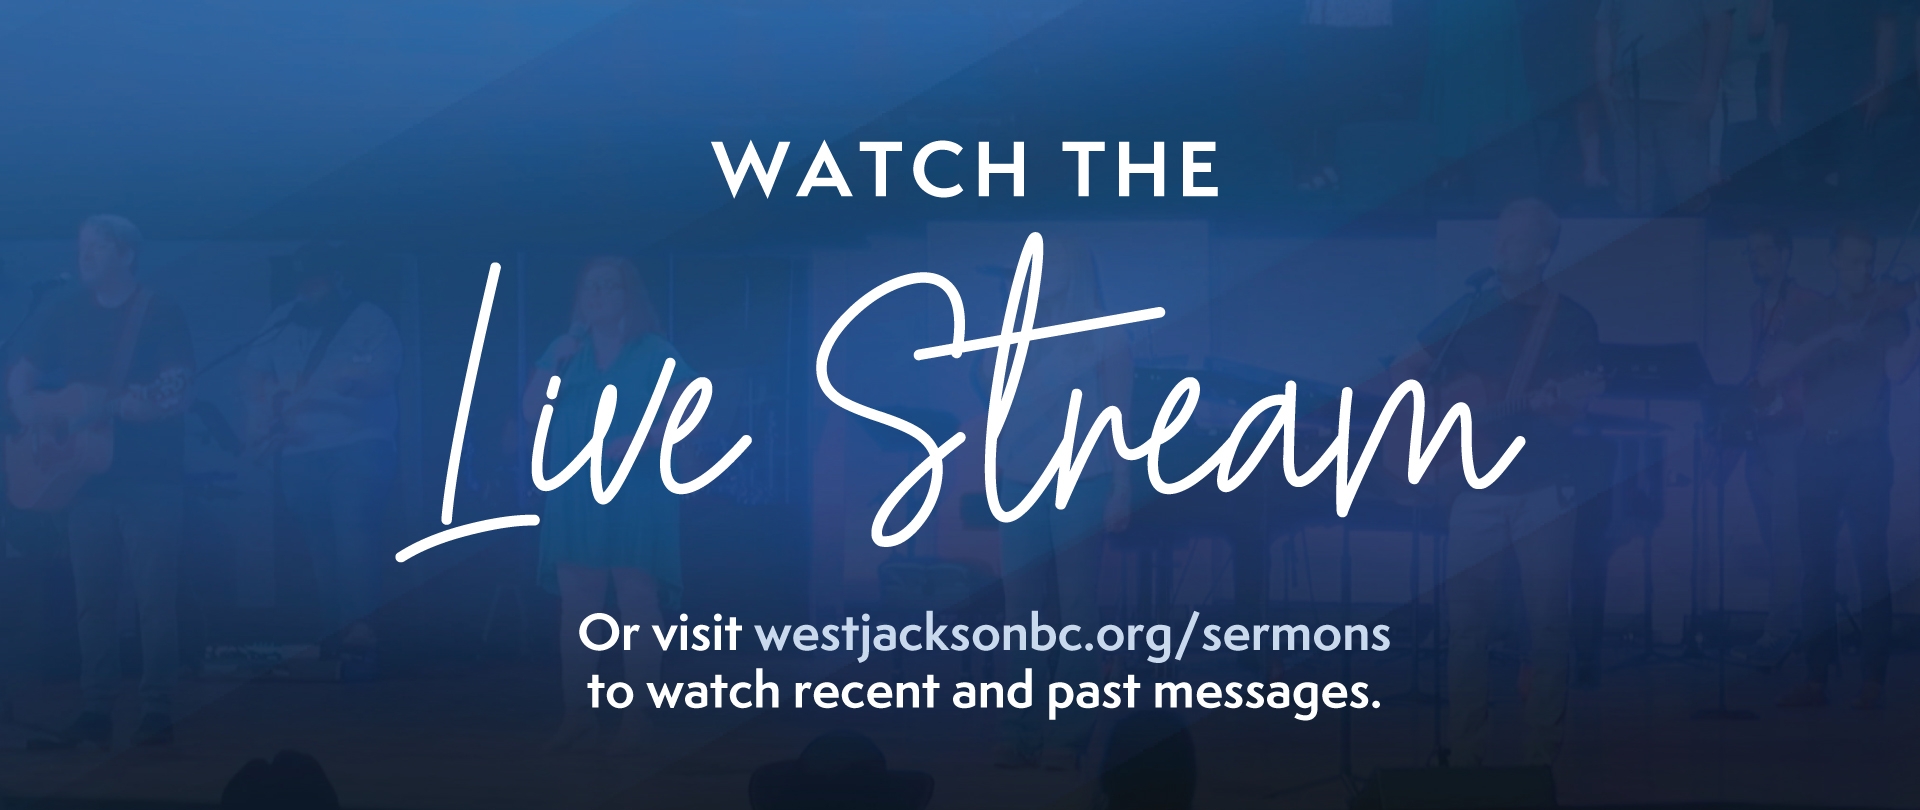 Watch the Live Stream Or visit westjacksonbc.org/sermons to watch recent and past messages.